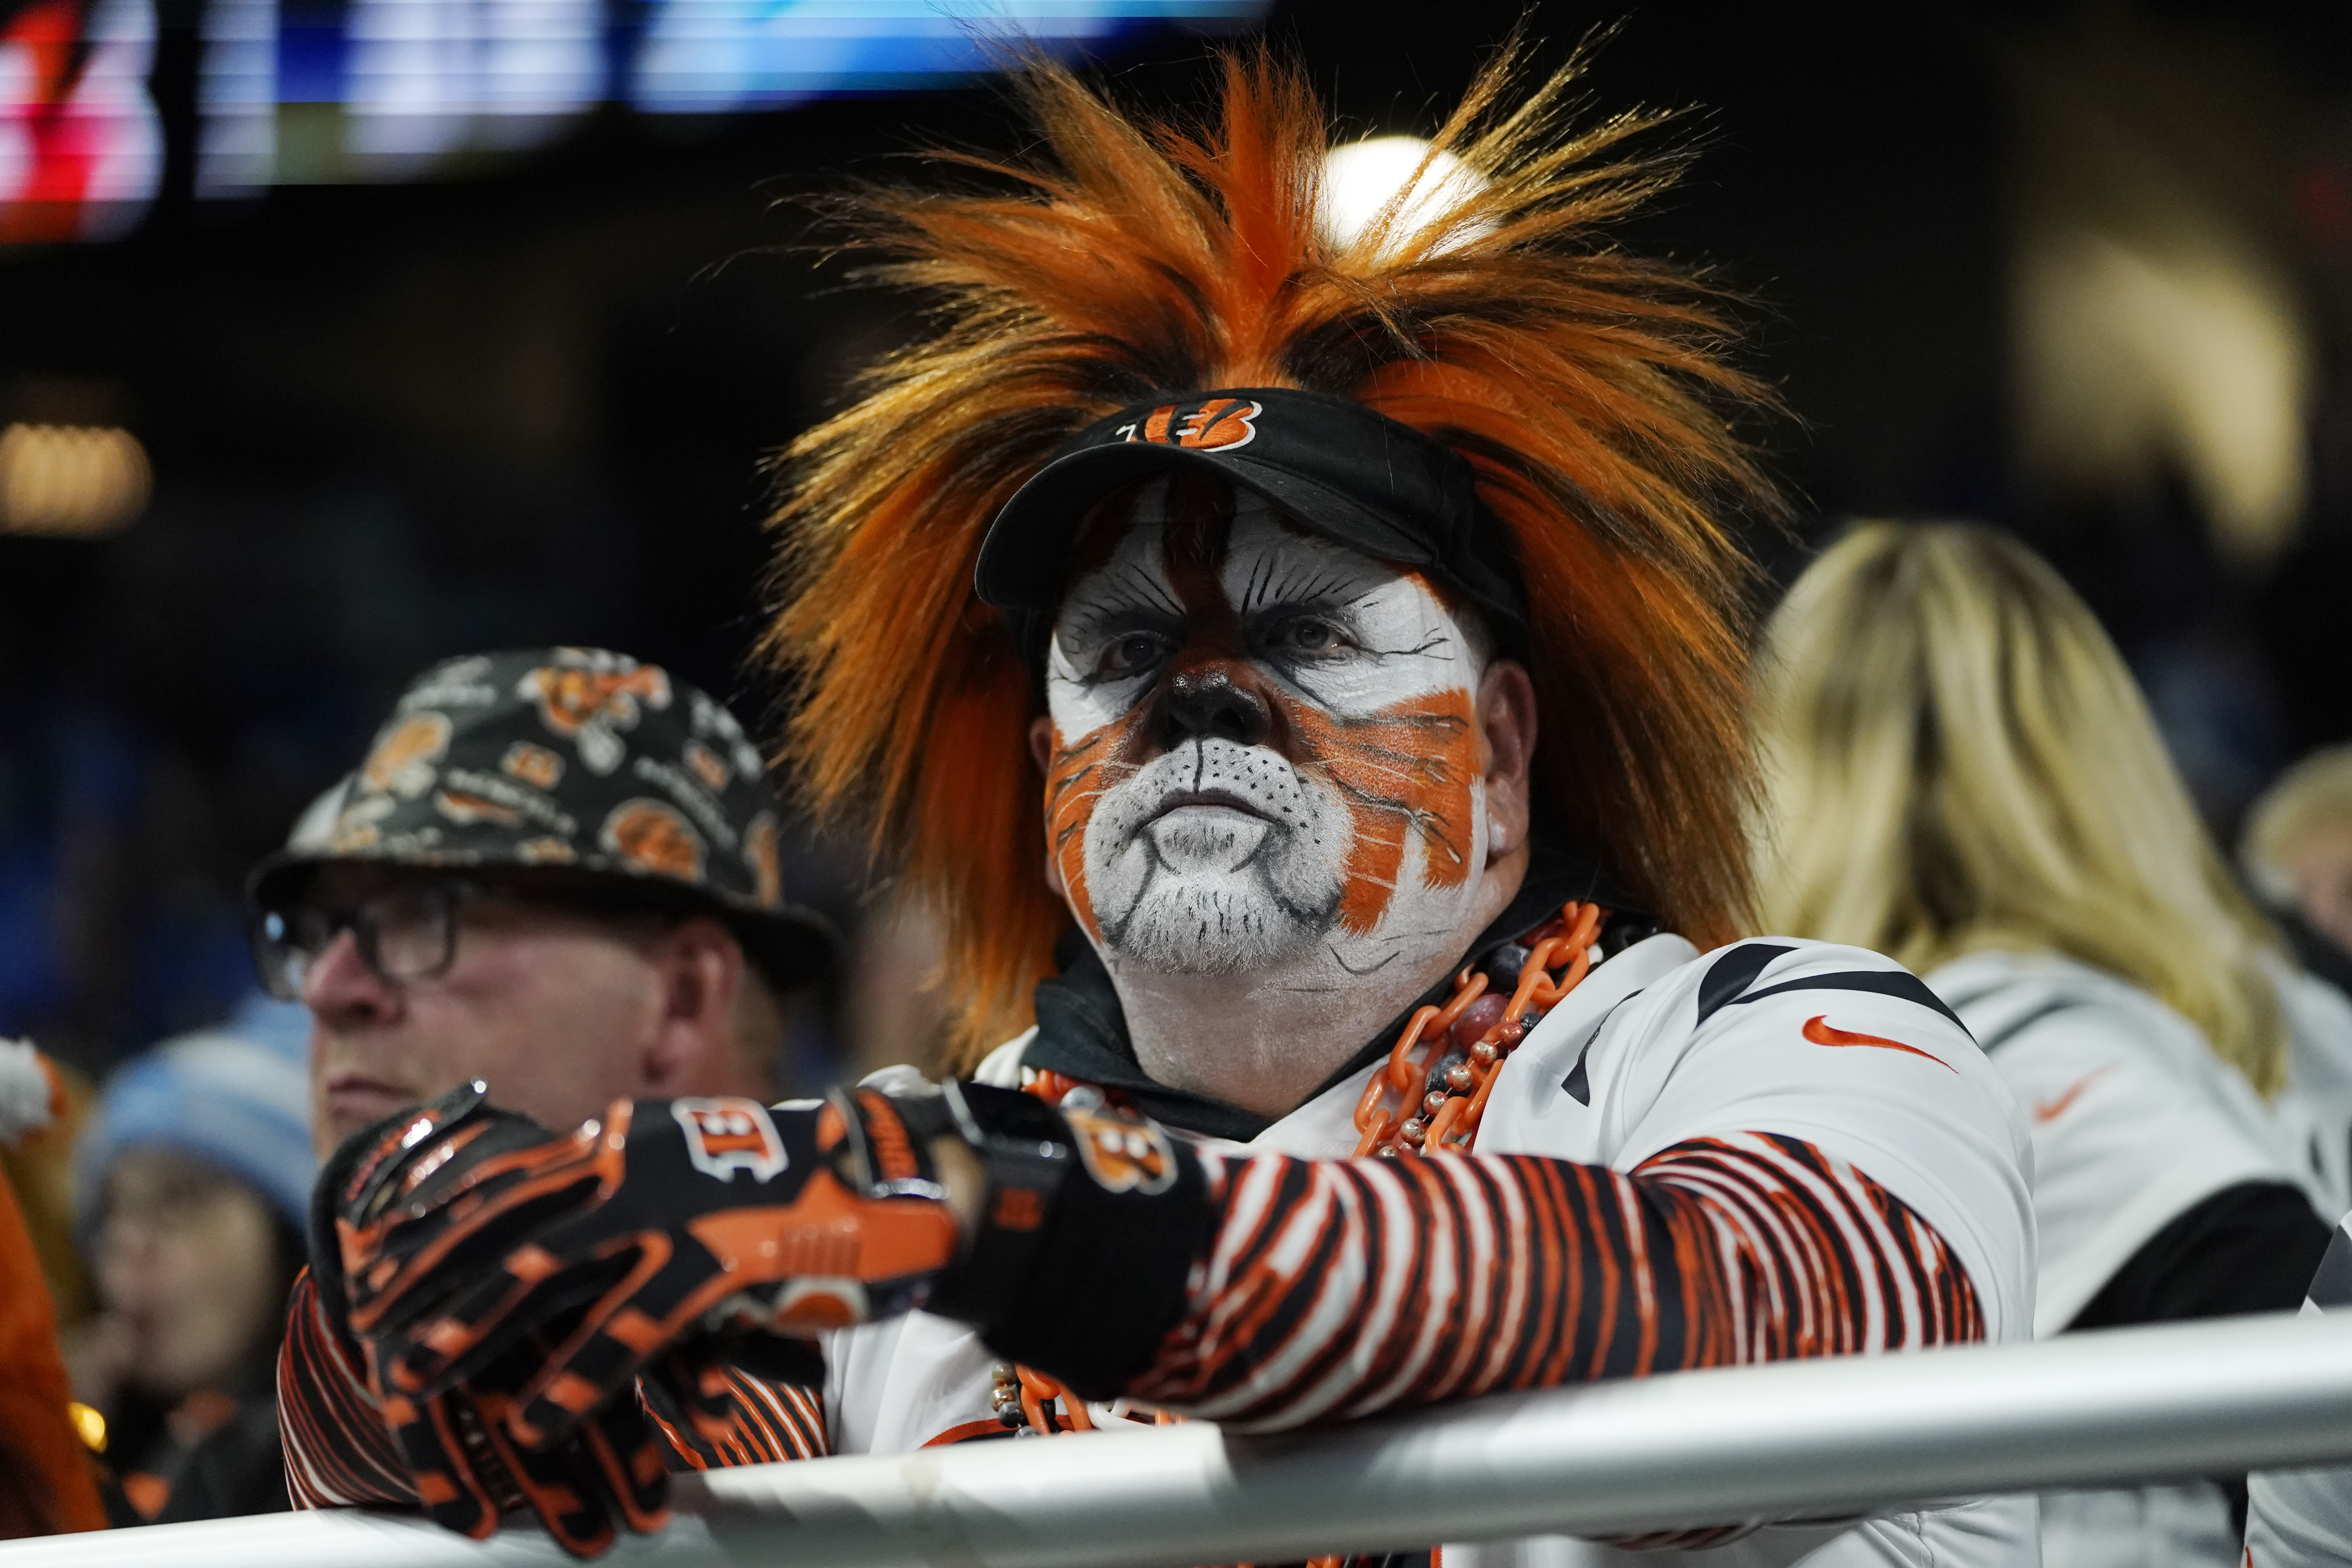 Bengals fans step up to support one of their own